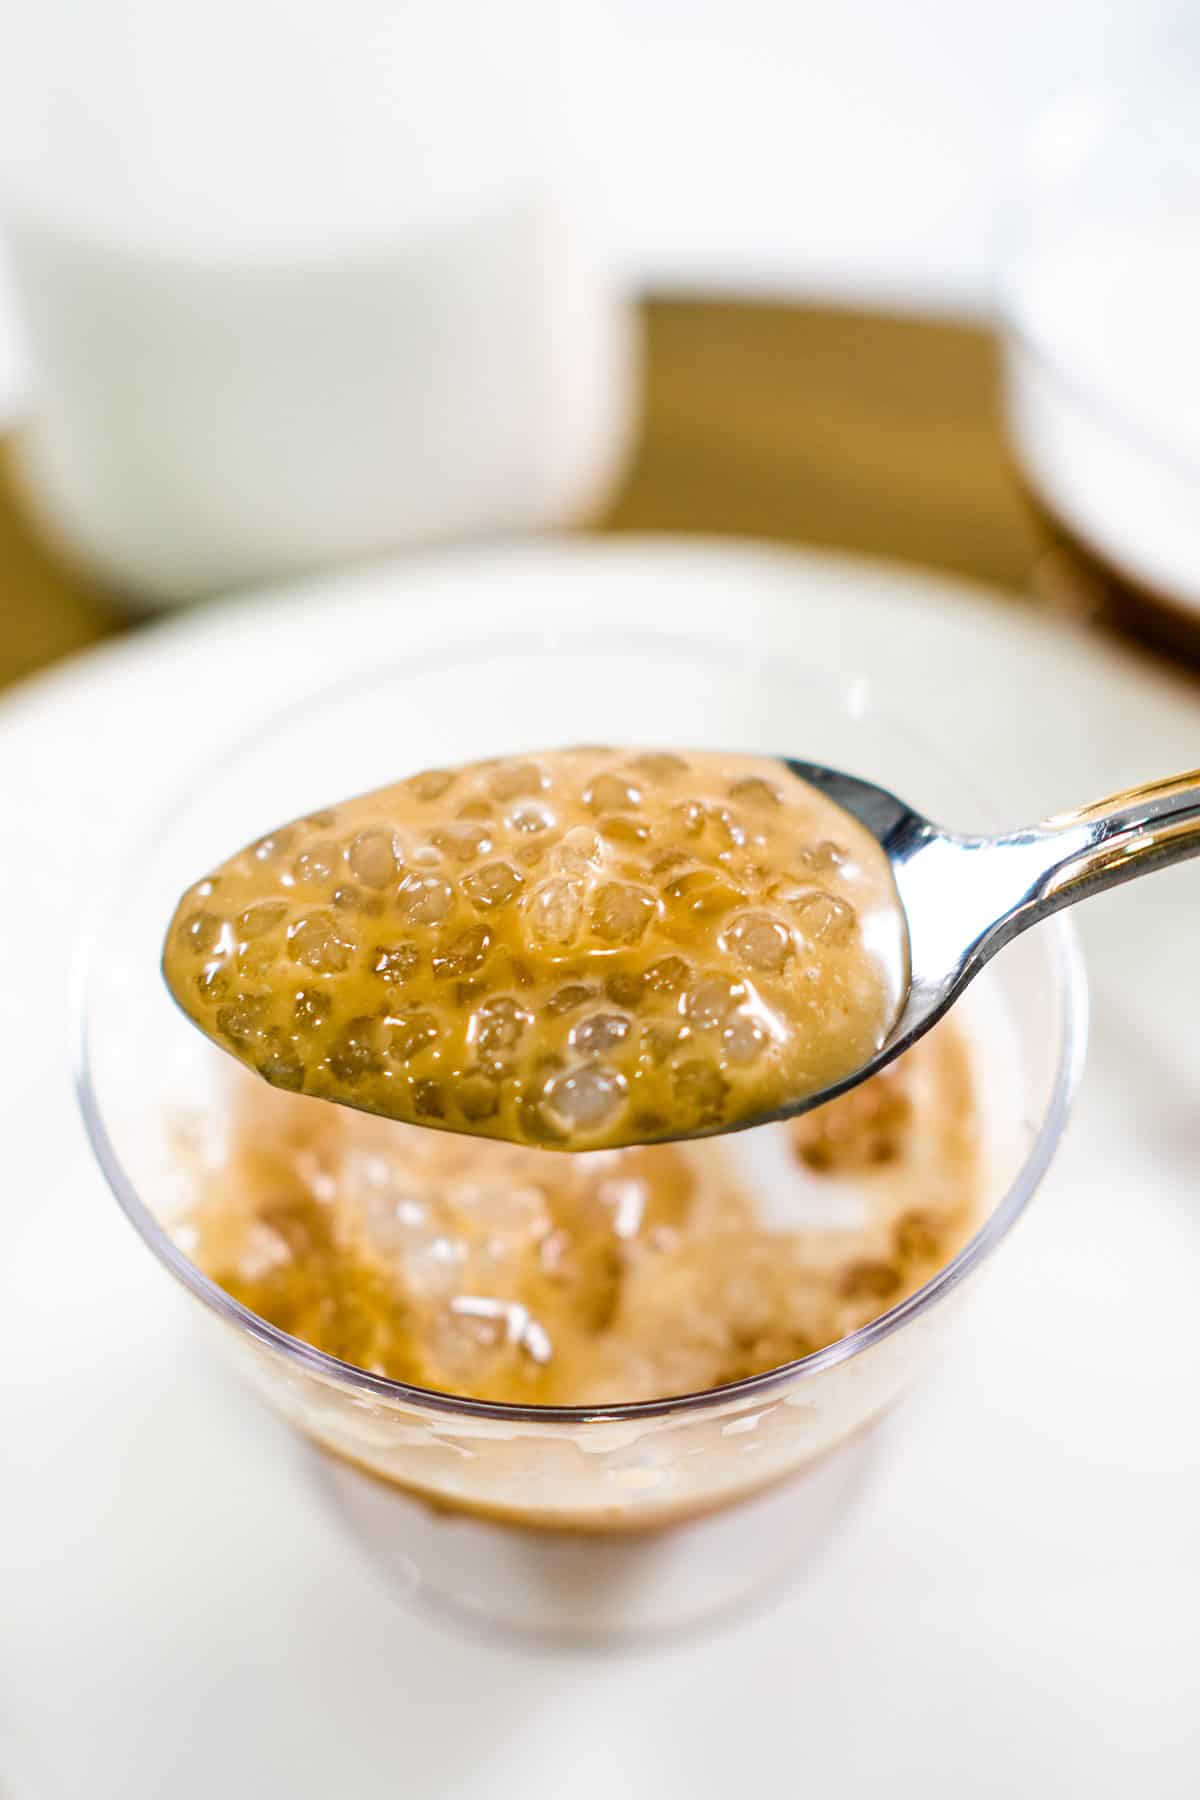 A spoon of sago pudding in coconut milk and palm sugar syrup